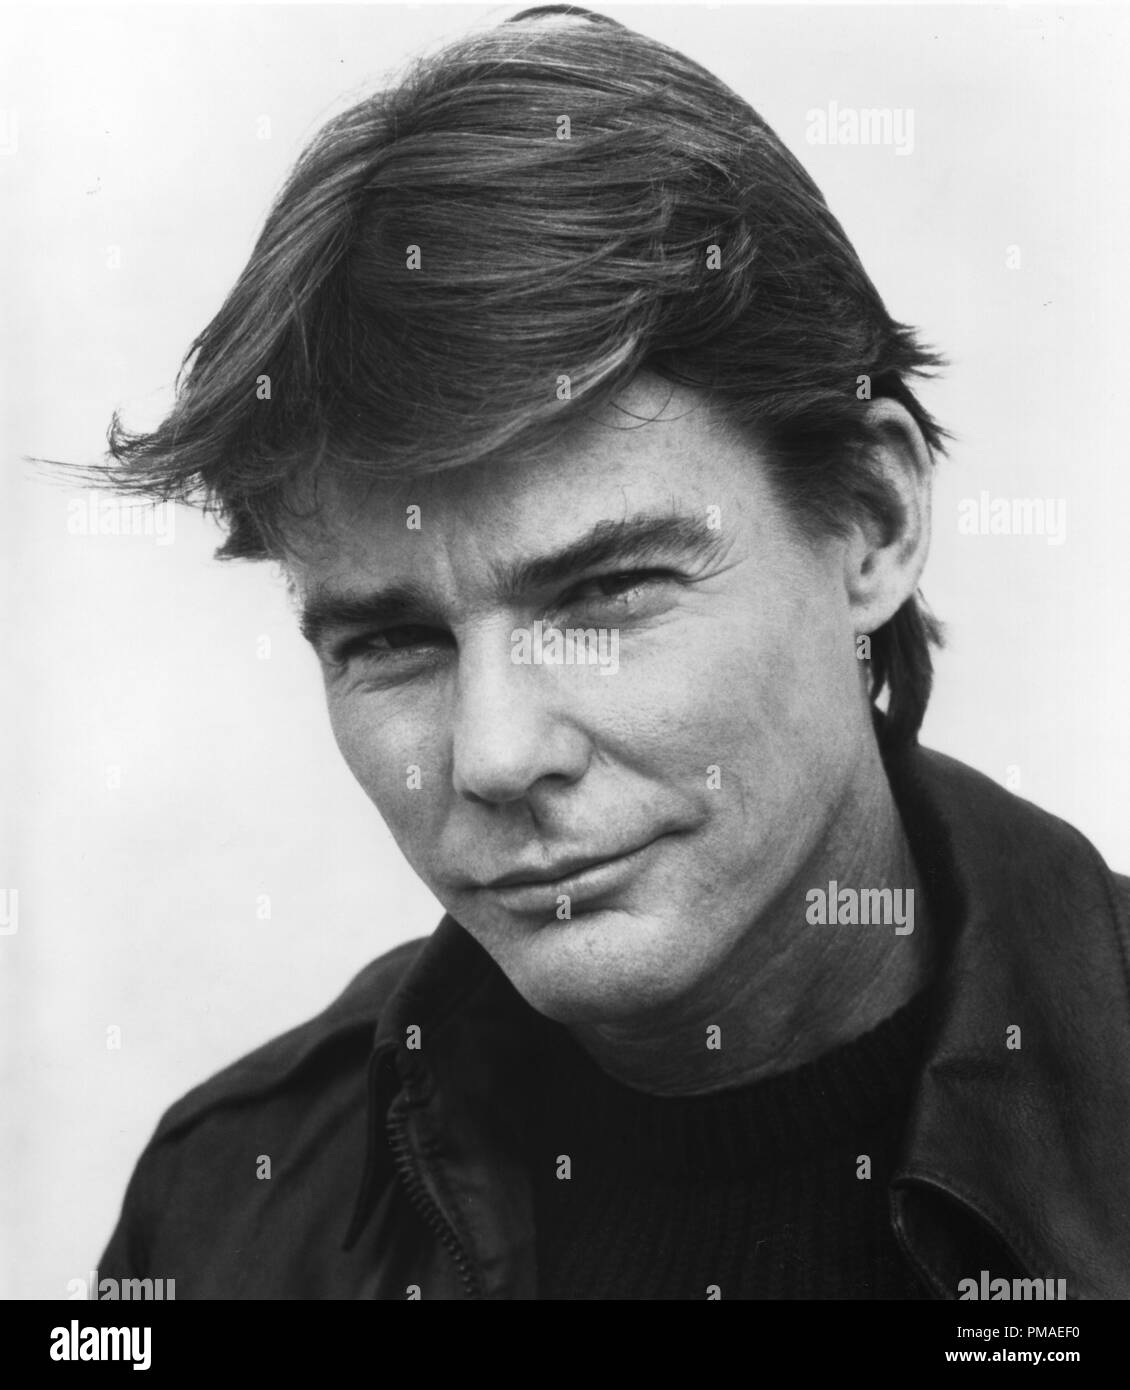 Jan-Michael Vincent, 'Airwolf', 1984 Universal Television  File Reference # 32509 851THA Stock Photo